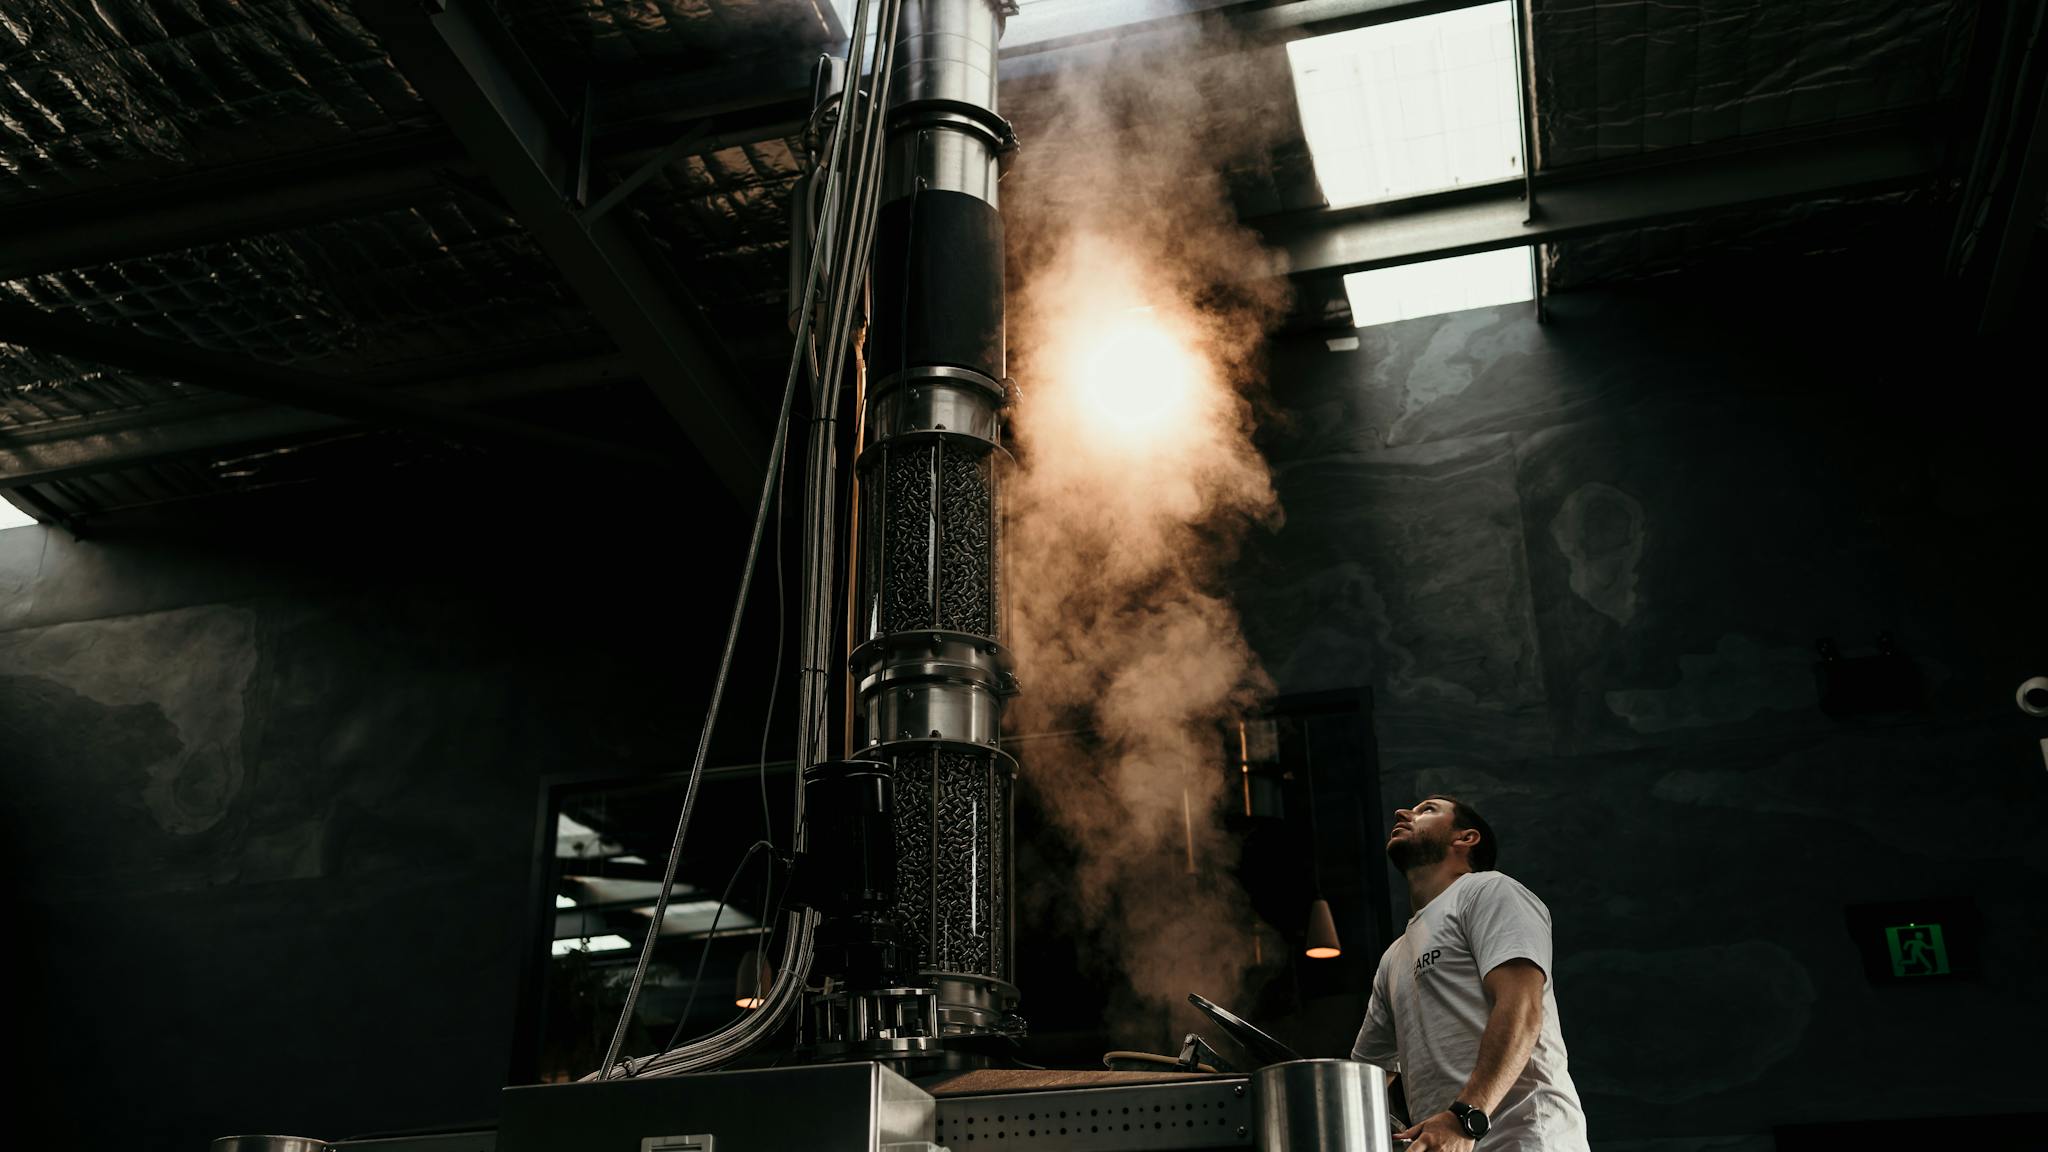 A man climbs a latter at a large stainless steel still and looks up as steam emerges